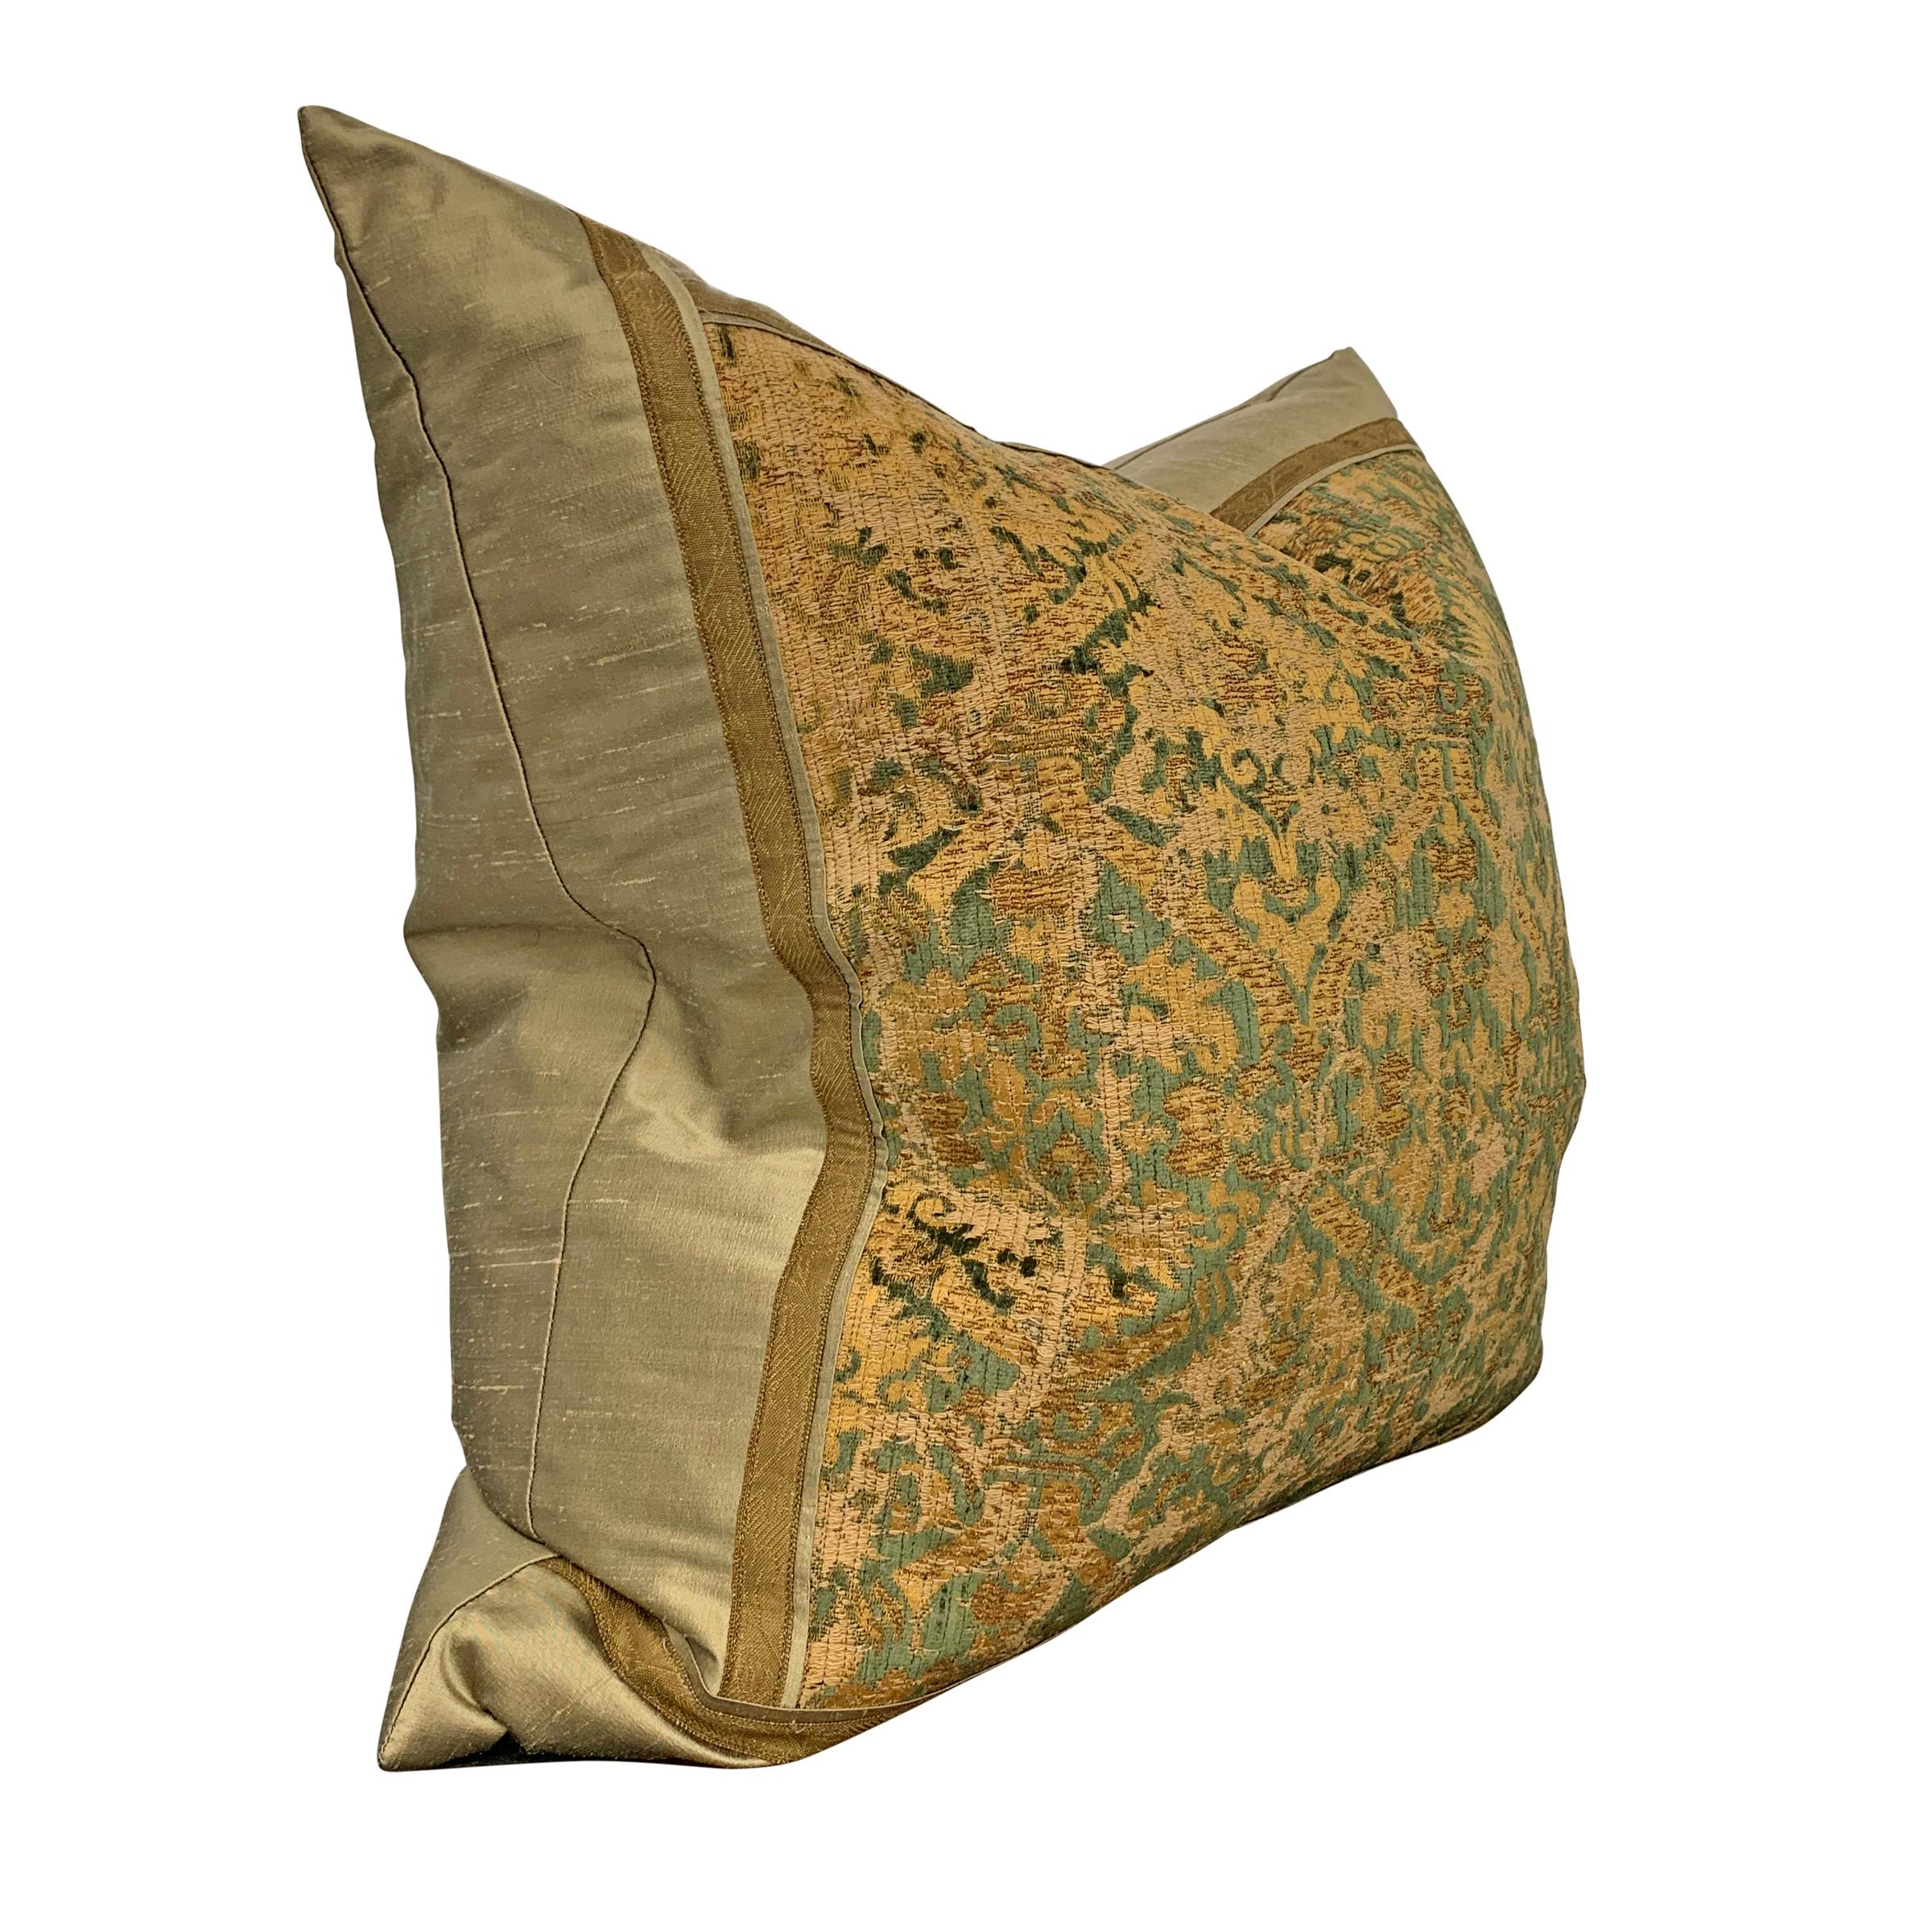 A Grande 19th century Italian silk velvet pillow with a fabulous green and gold damask pattern trimmed with antique gold thread trim, and mounted in new silk. Filled with down.